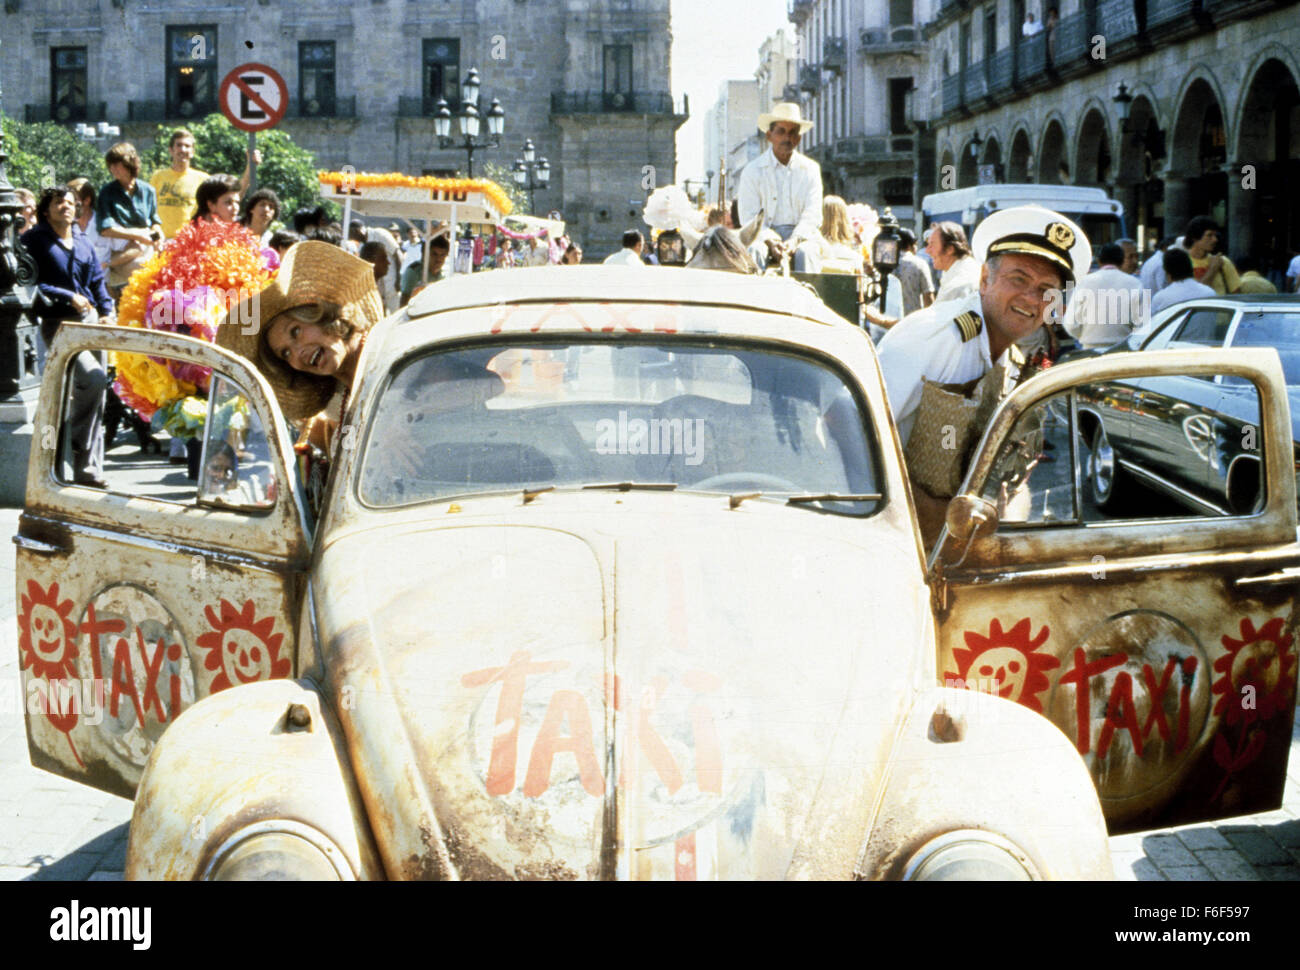 RELEASE DATE: June 25, 1980   MOVIE TITLE: Herbie Goes Bananas   STUDIO: Walt Disney Productions   DIRECTOR: Vincent McEveety  PLOT: The adorable little VW helps its owners break up a counterfeiting ring in Mexico.   PICTURED: Scene from movie  (Credit Image: c Walt Disney Productions/Entertainment Pictures) Stock Photo